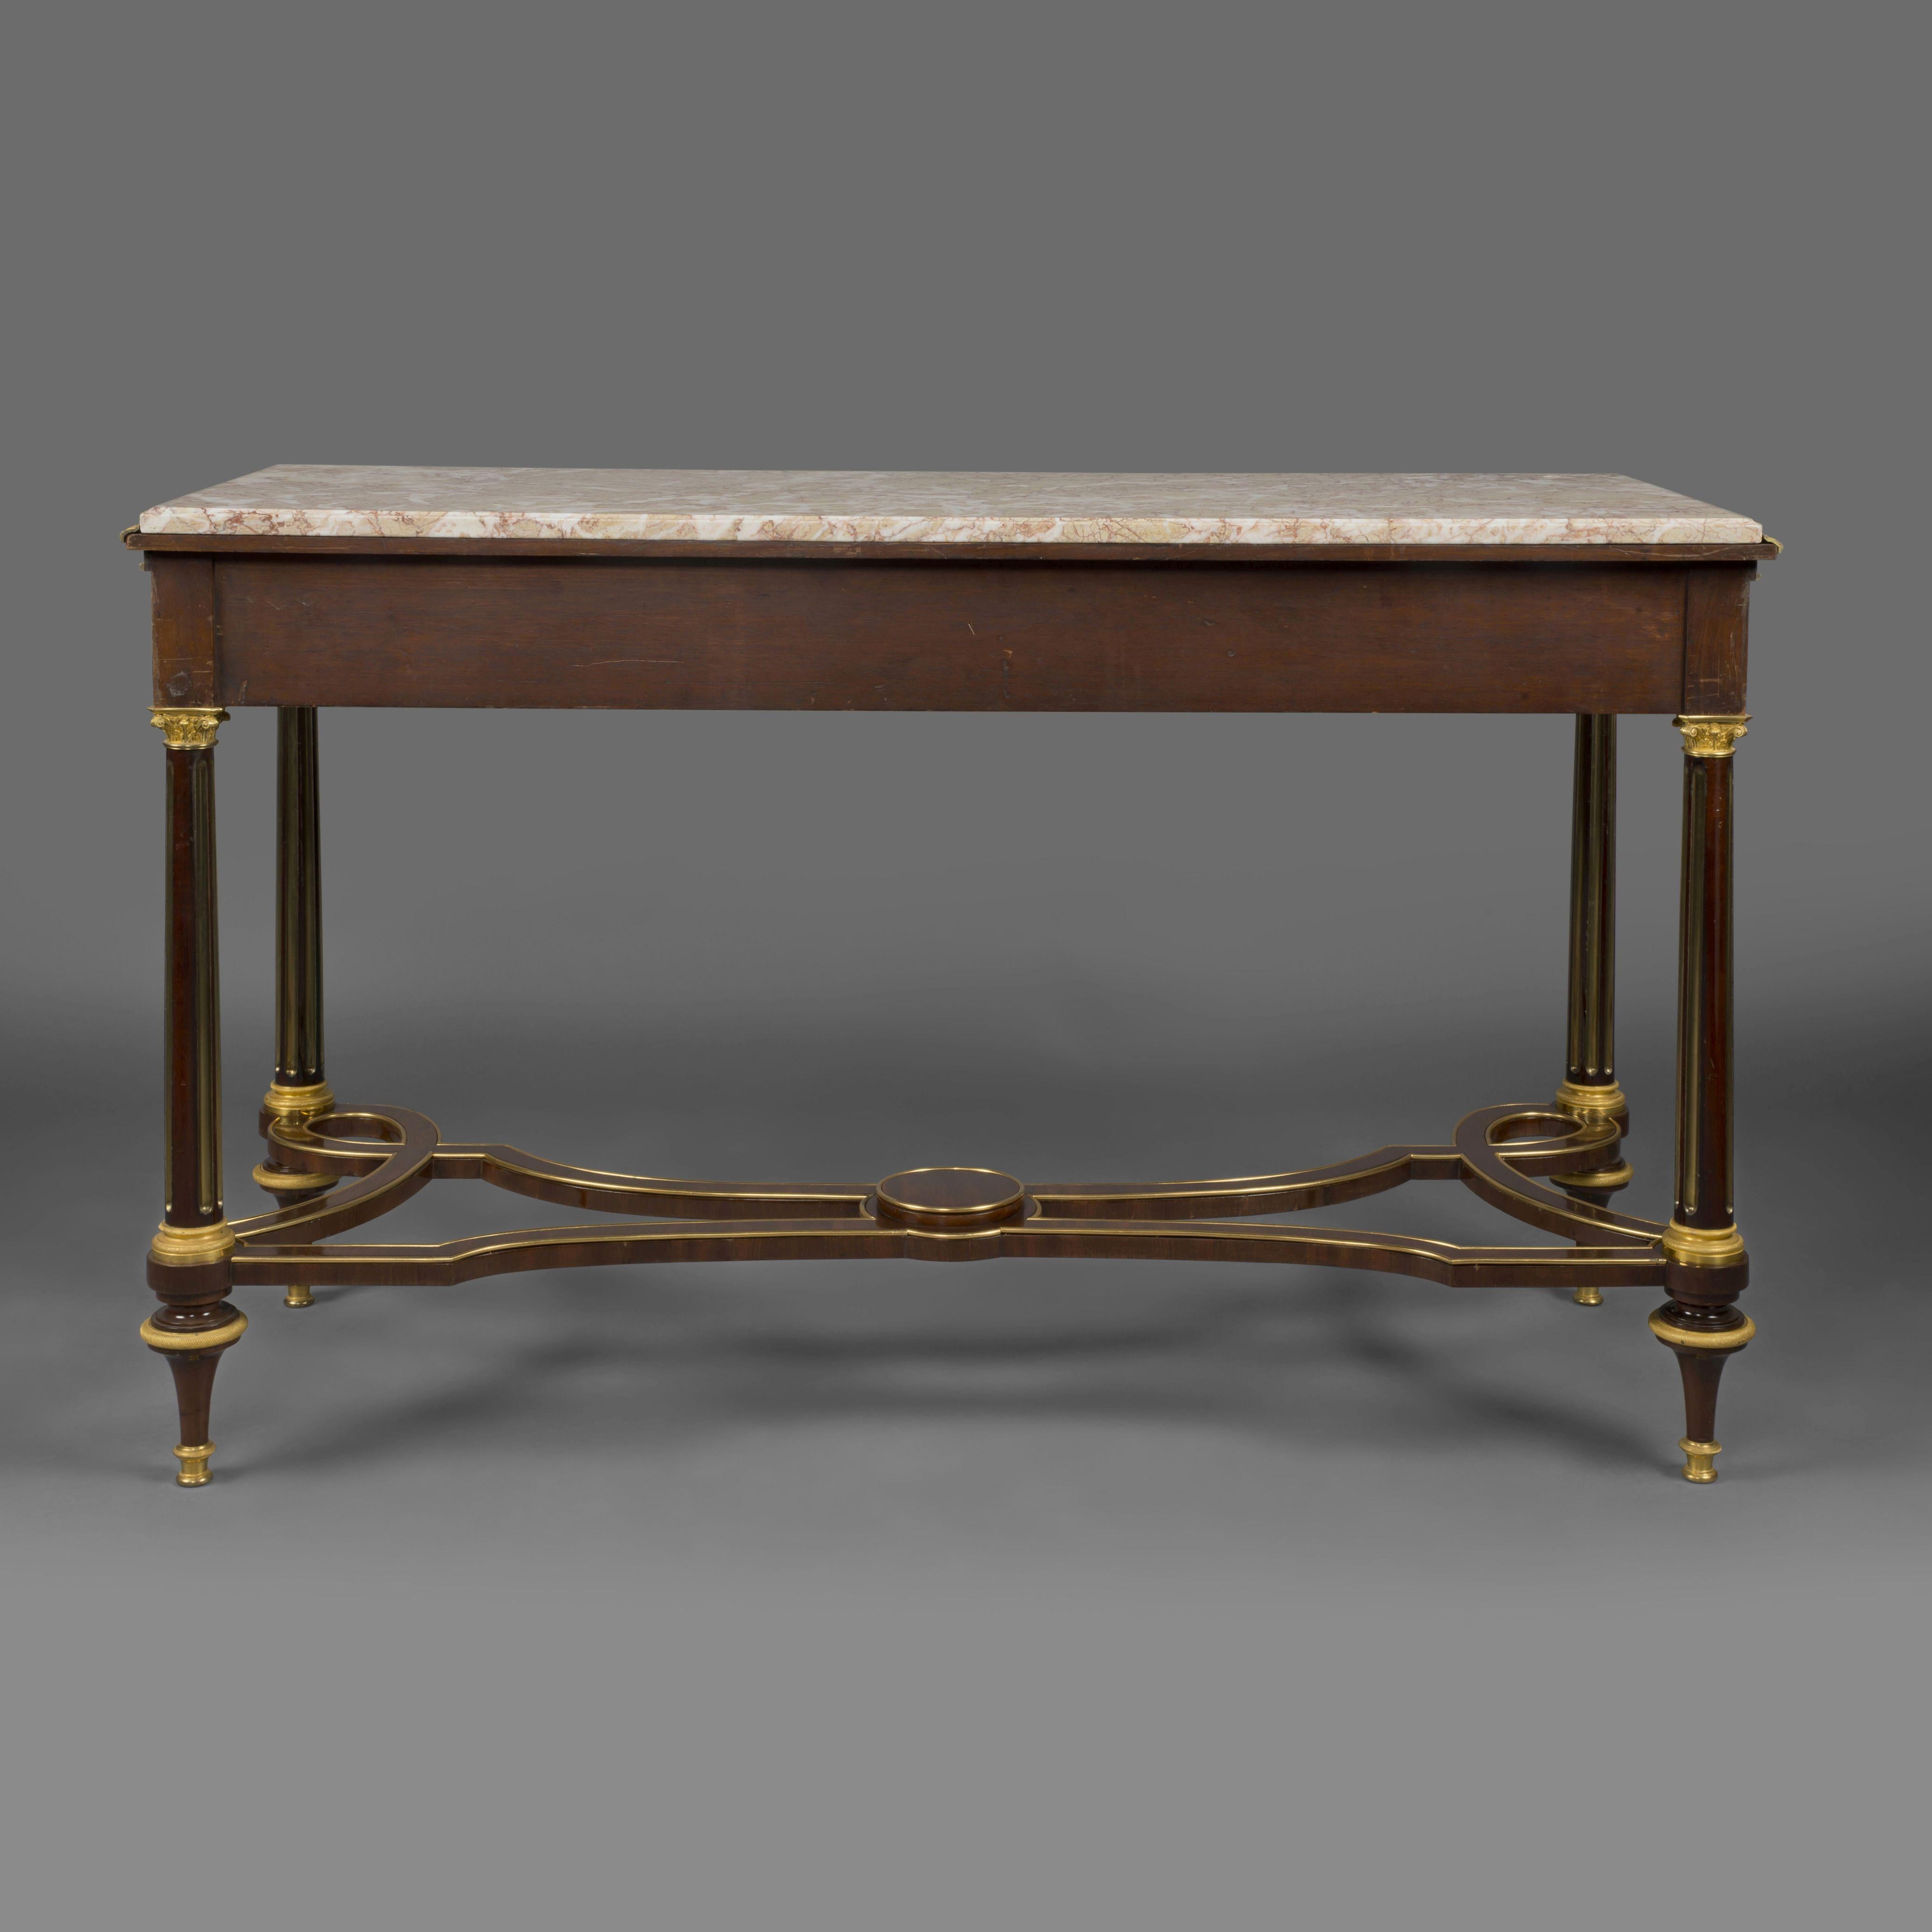 19th Century Fine Pair of Gilt-Bronze Mounted Mahogany Console Tables For Sale